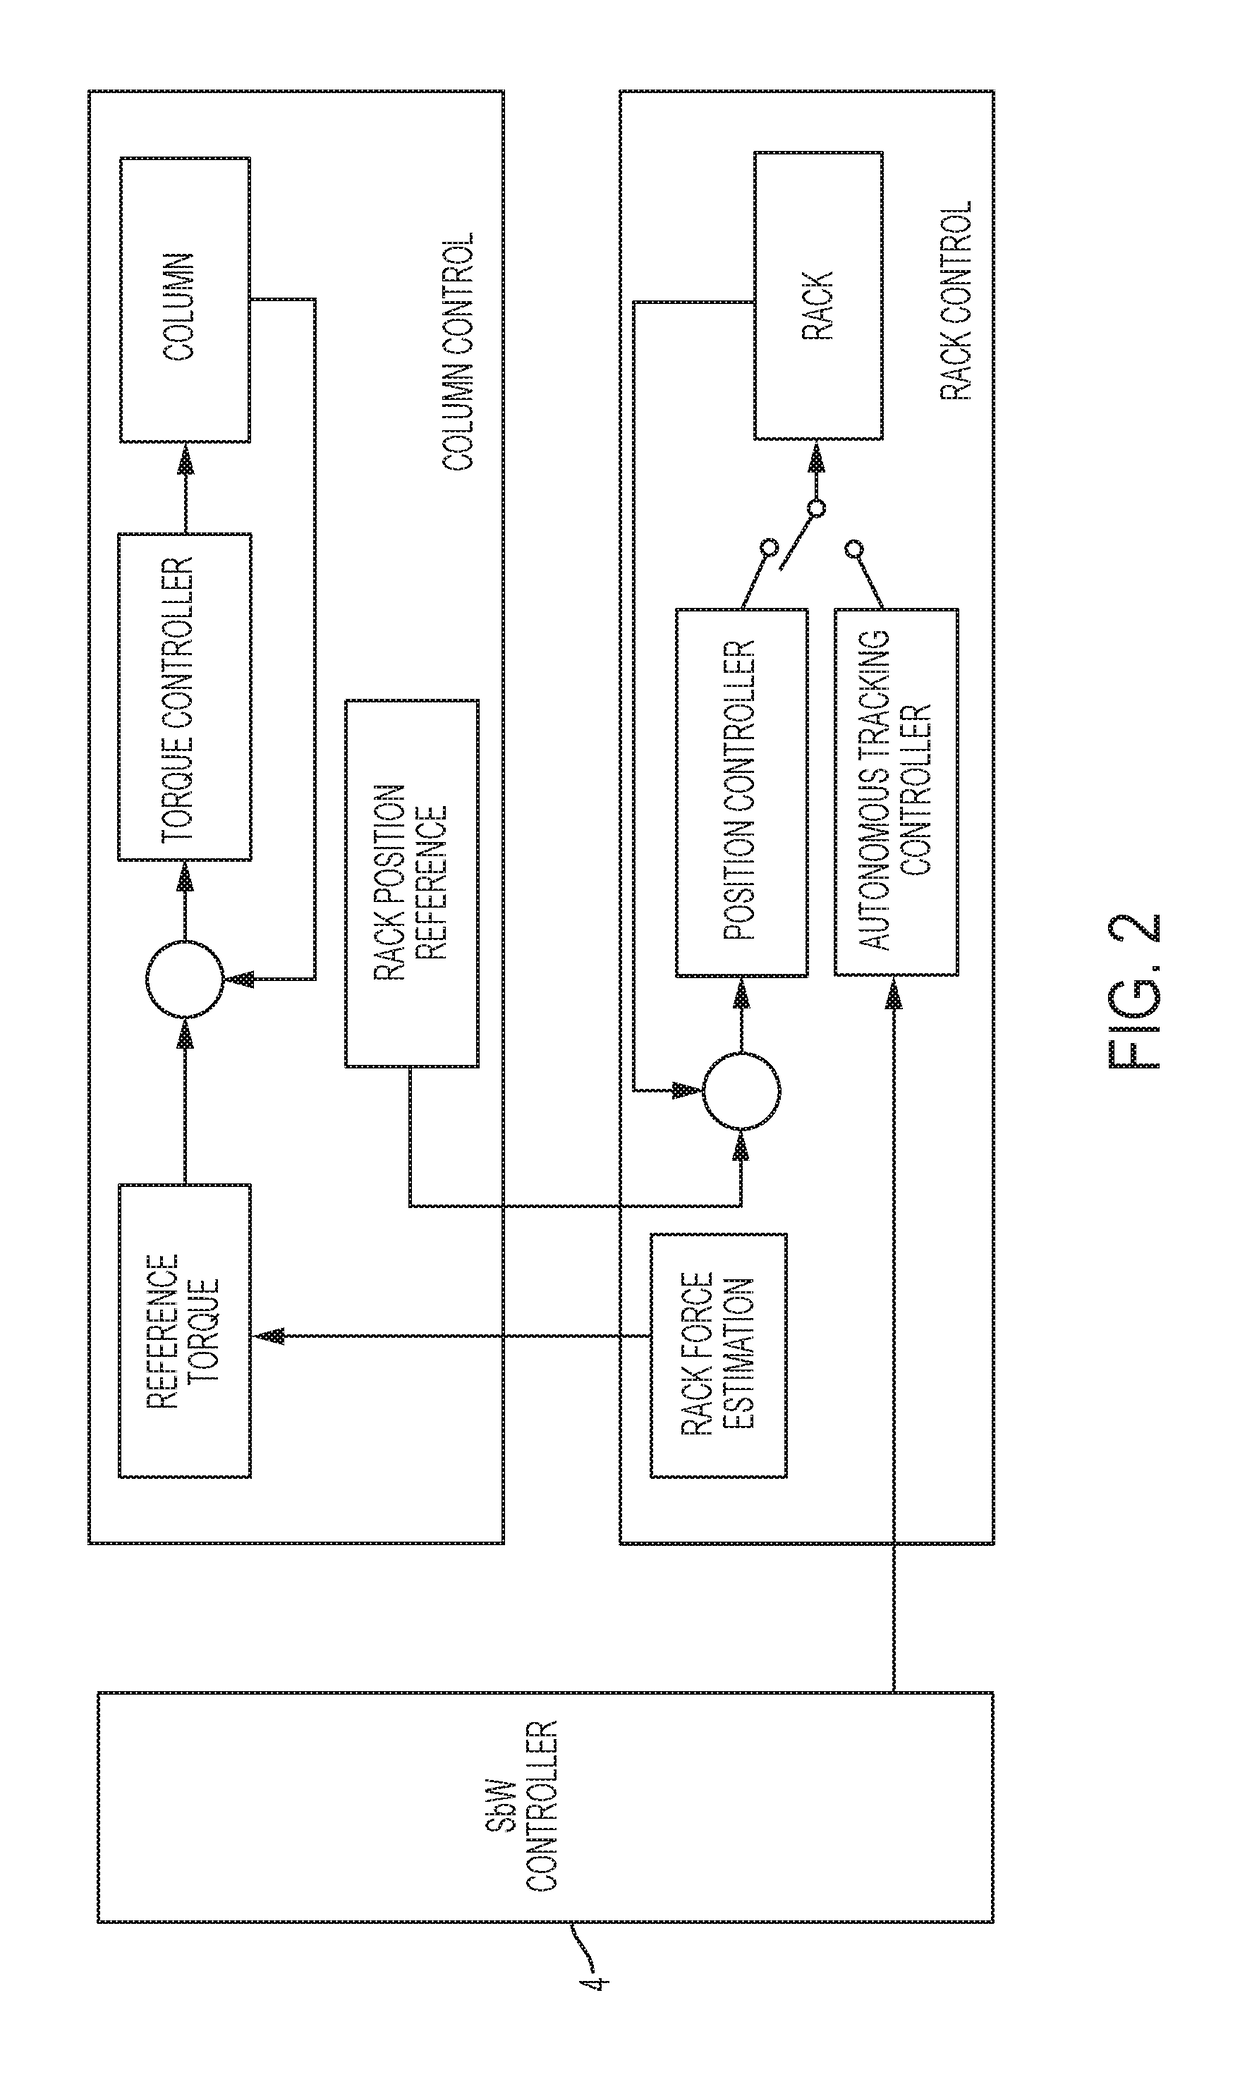 Vehicle steering system having a user experience based automated driving to manual driving transition system and method